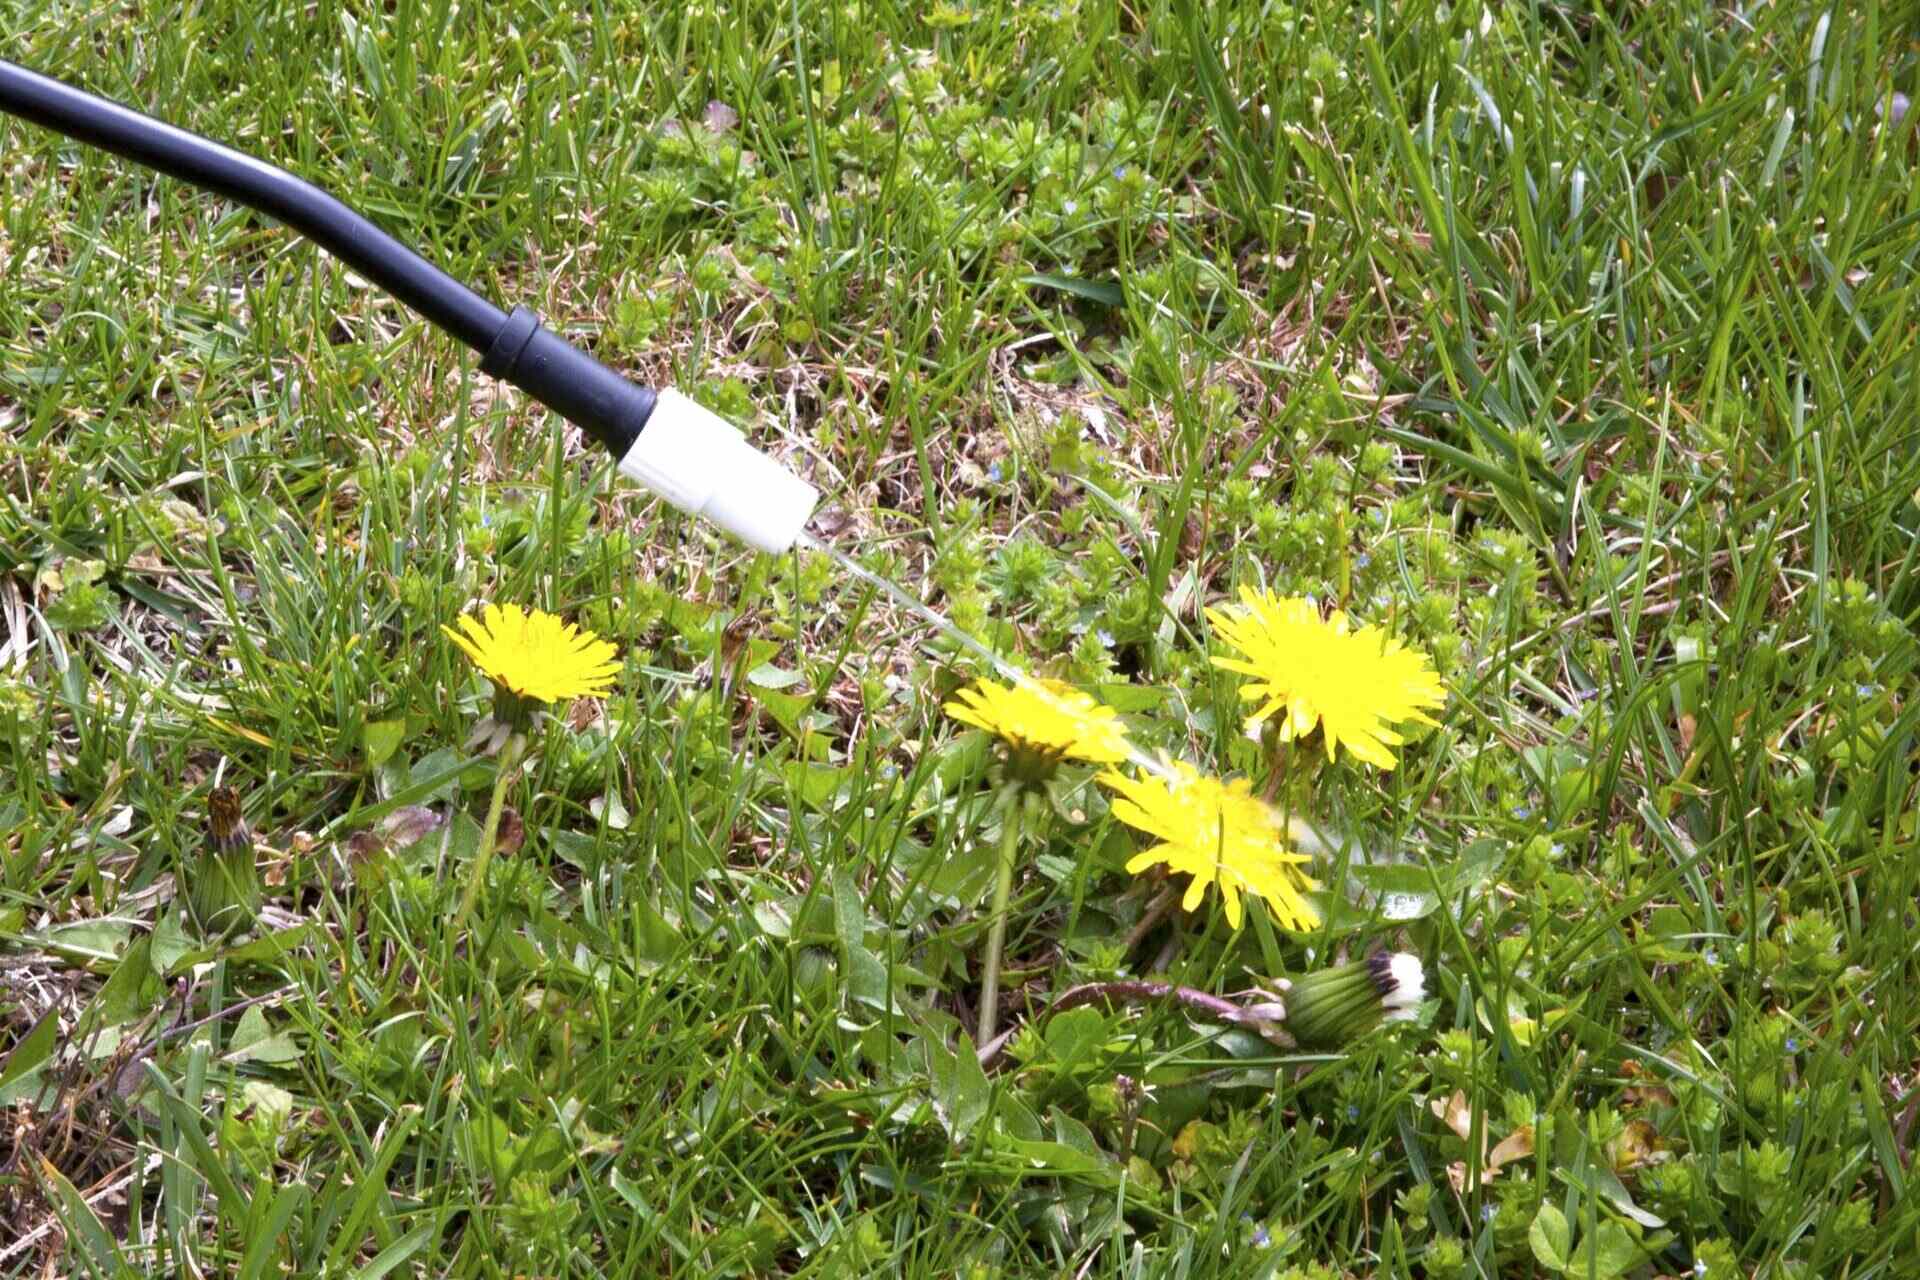 How To Kill Weeds In Lawns